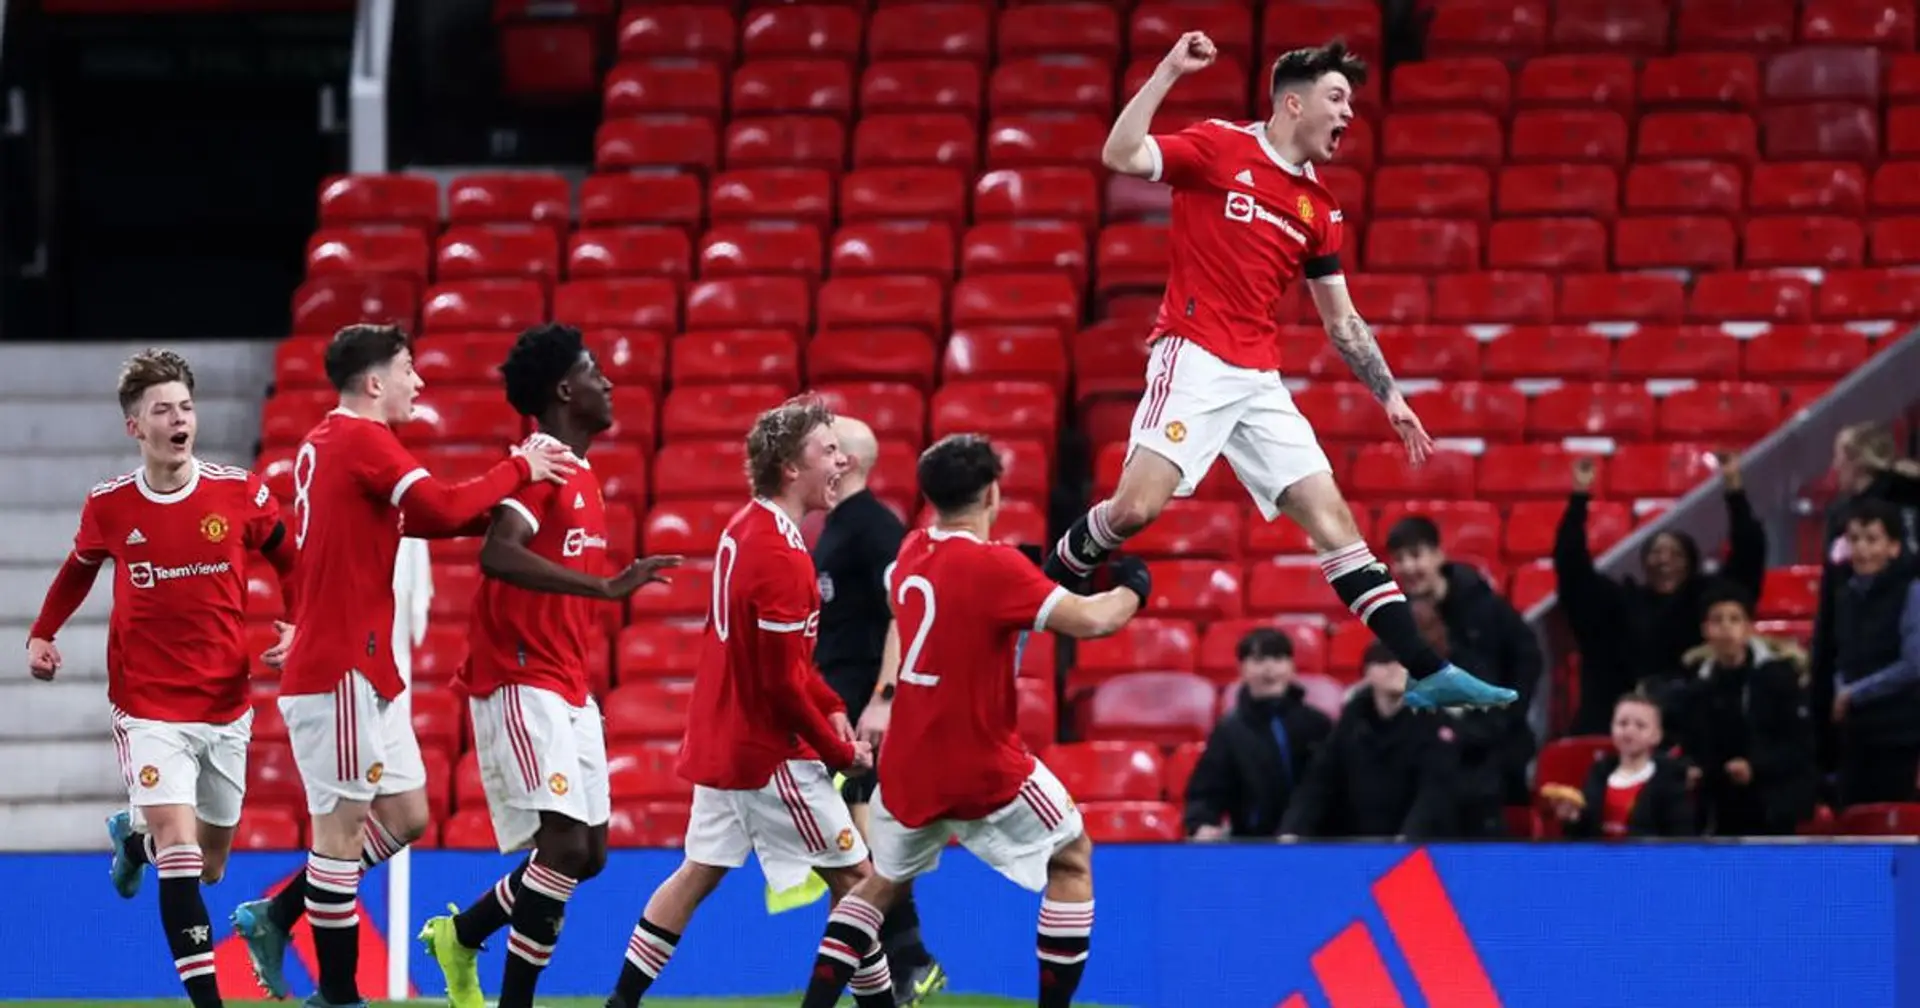 Man United reach Youth Cup final for the first time since 2011